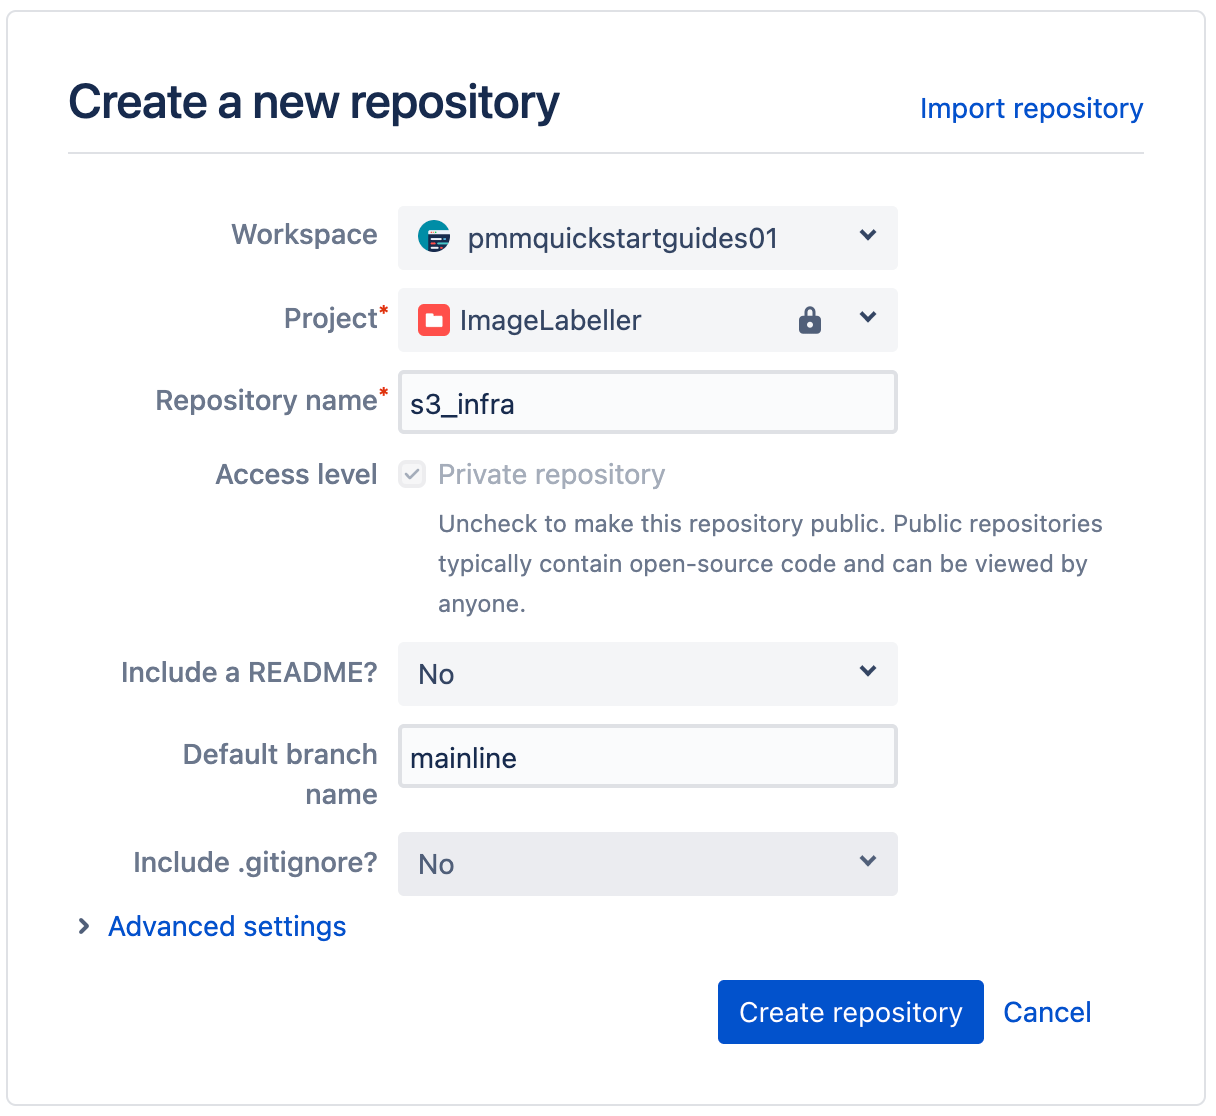 Pop-up window to create a new repository in Bitbucket